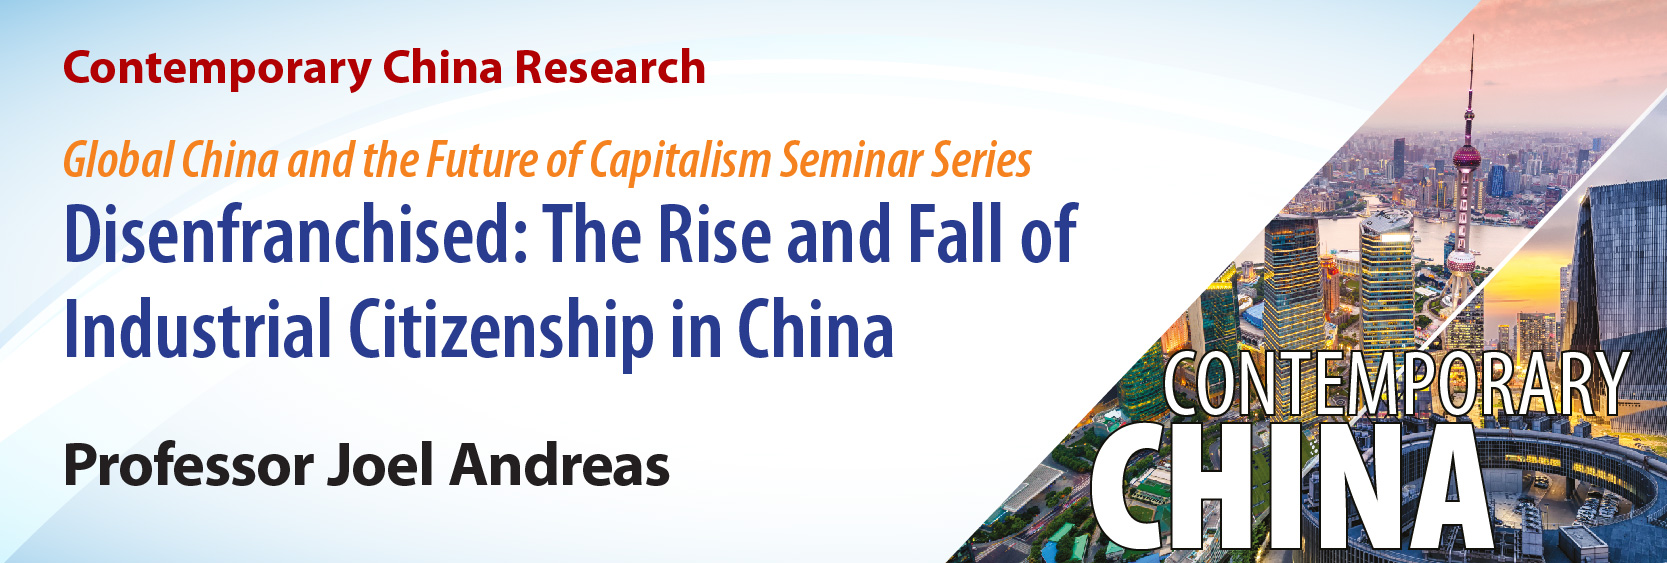 Disenfranchised: the rise and fall of industrial citizenship in China